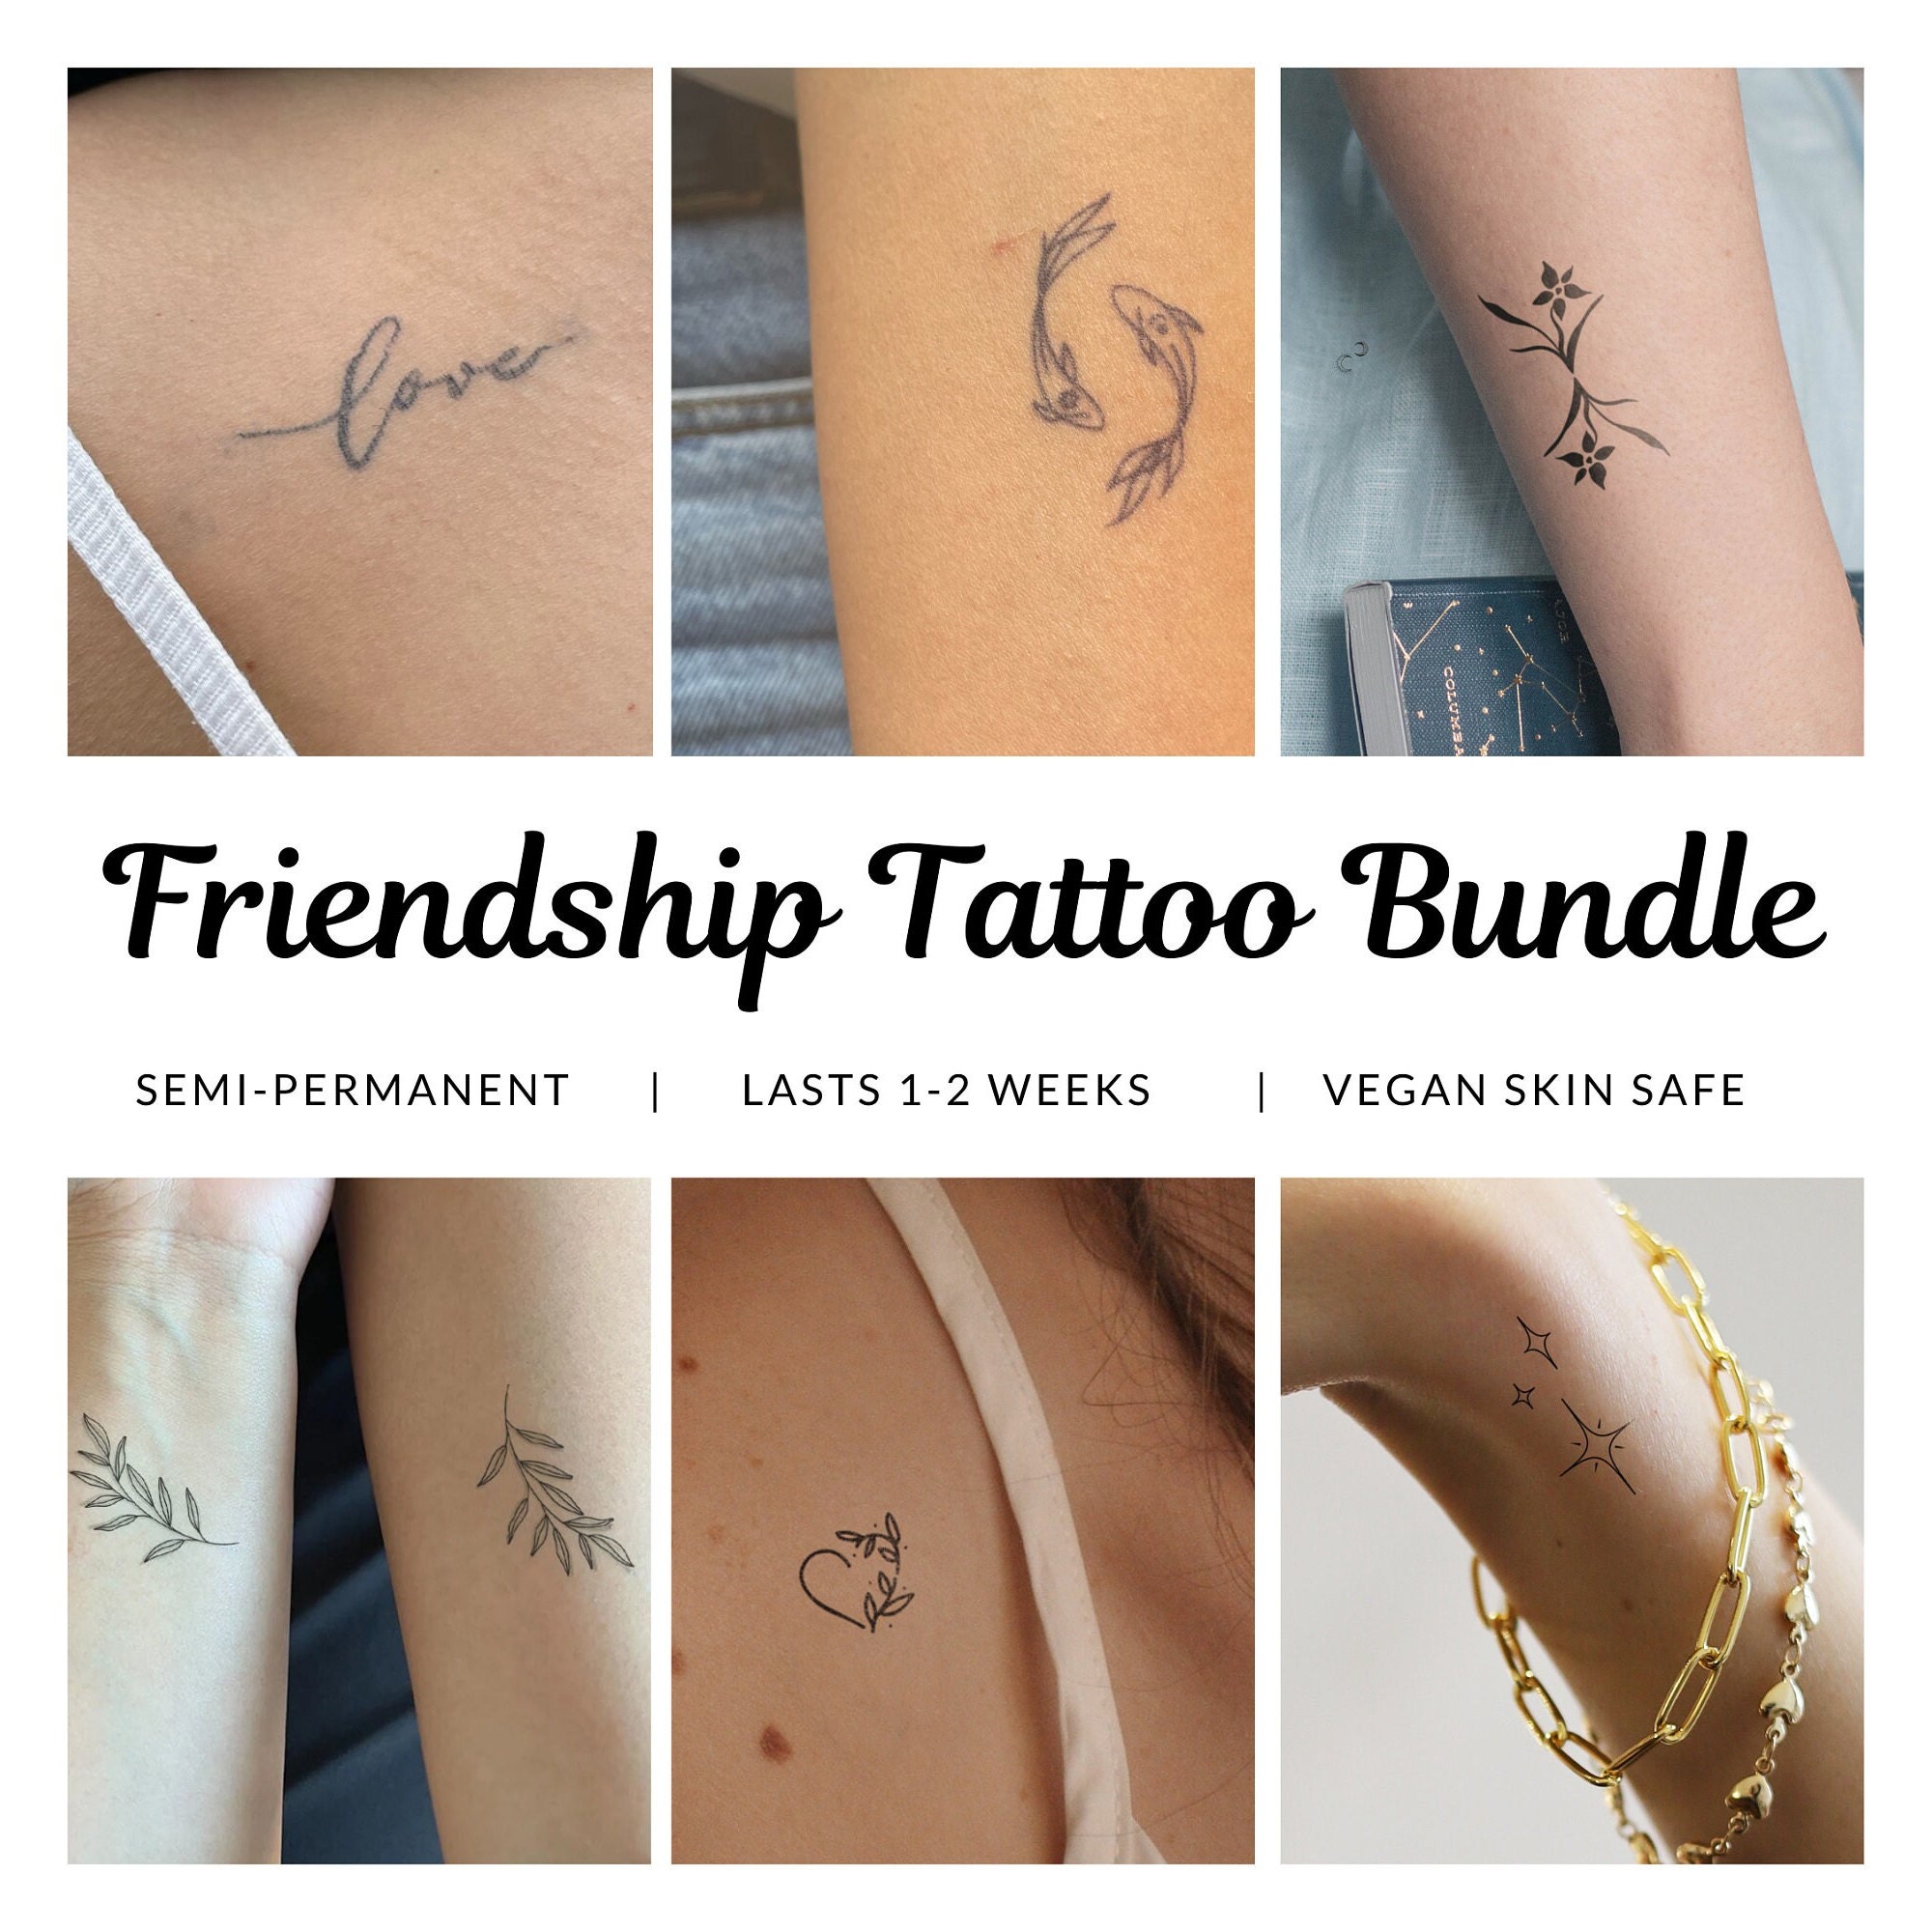 Impeccable Small Friendship Tattoos on Foot - Small Friendship Tattoos -  Small Tattoos - MomCanvas